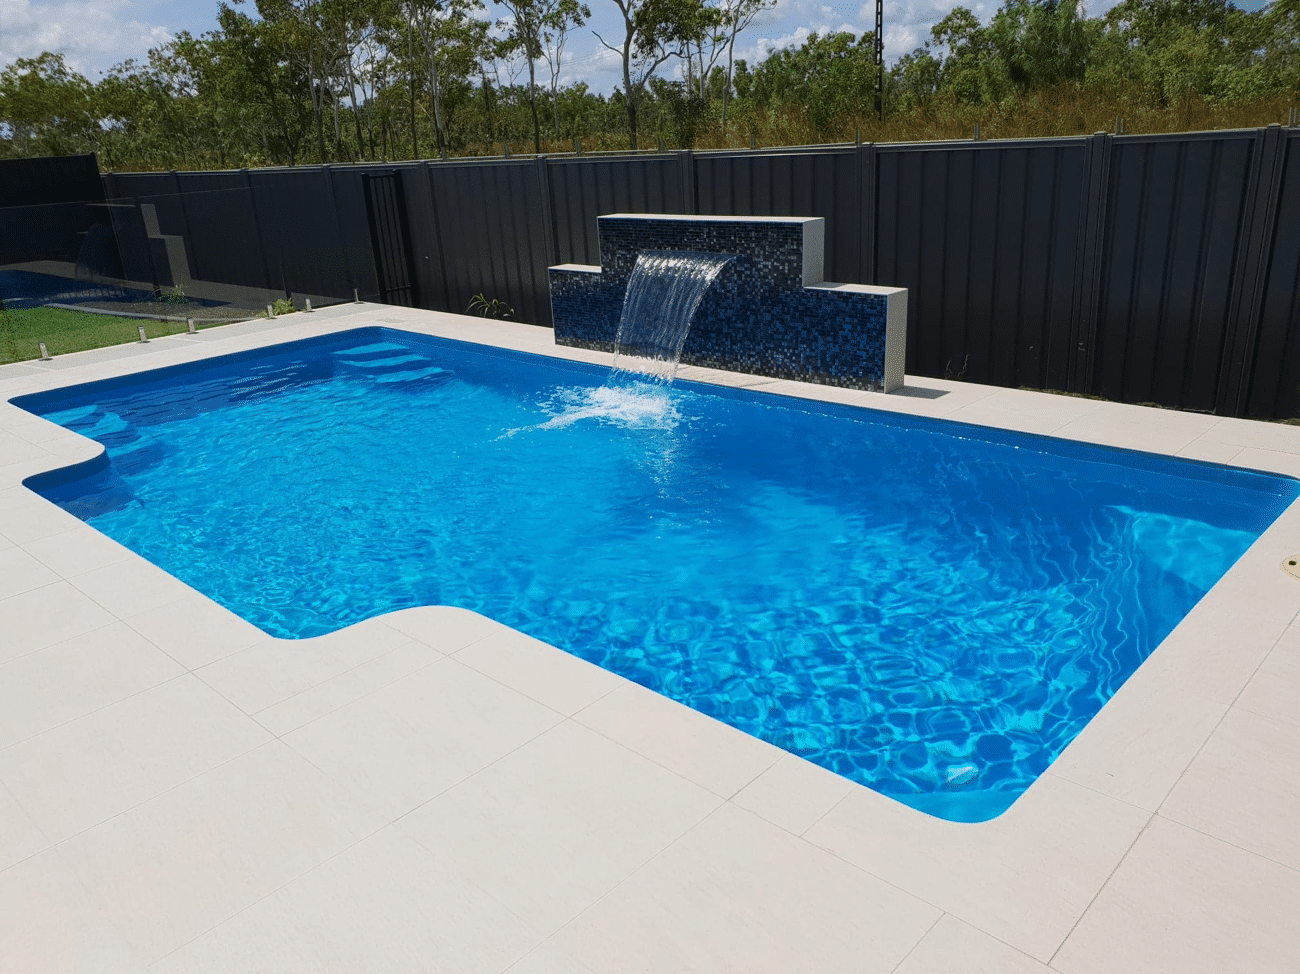 Pool with stone fountain — Darwin Fibreglass Pools & Spas In Winnellie, NT